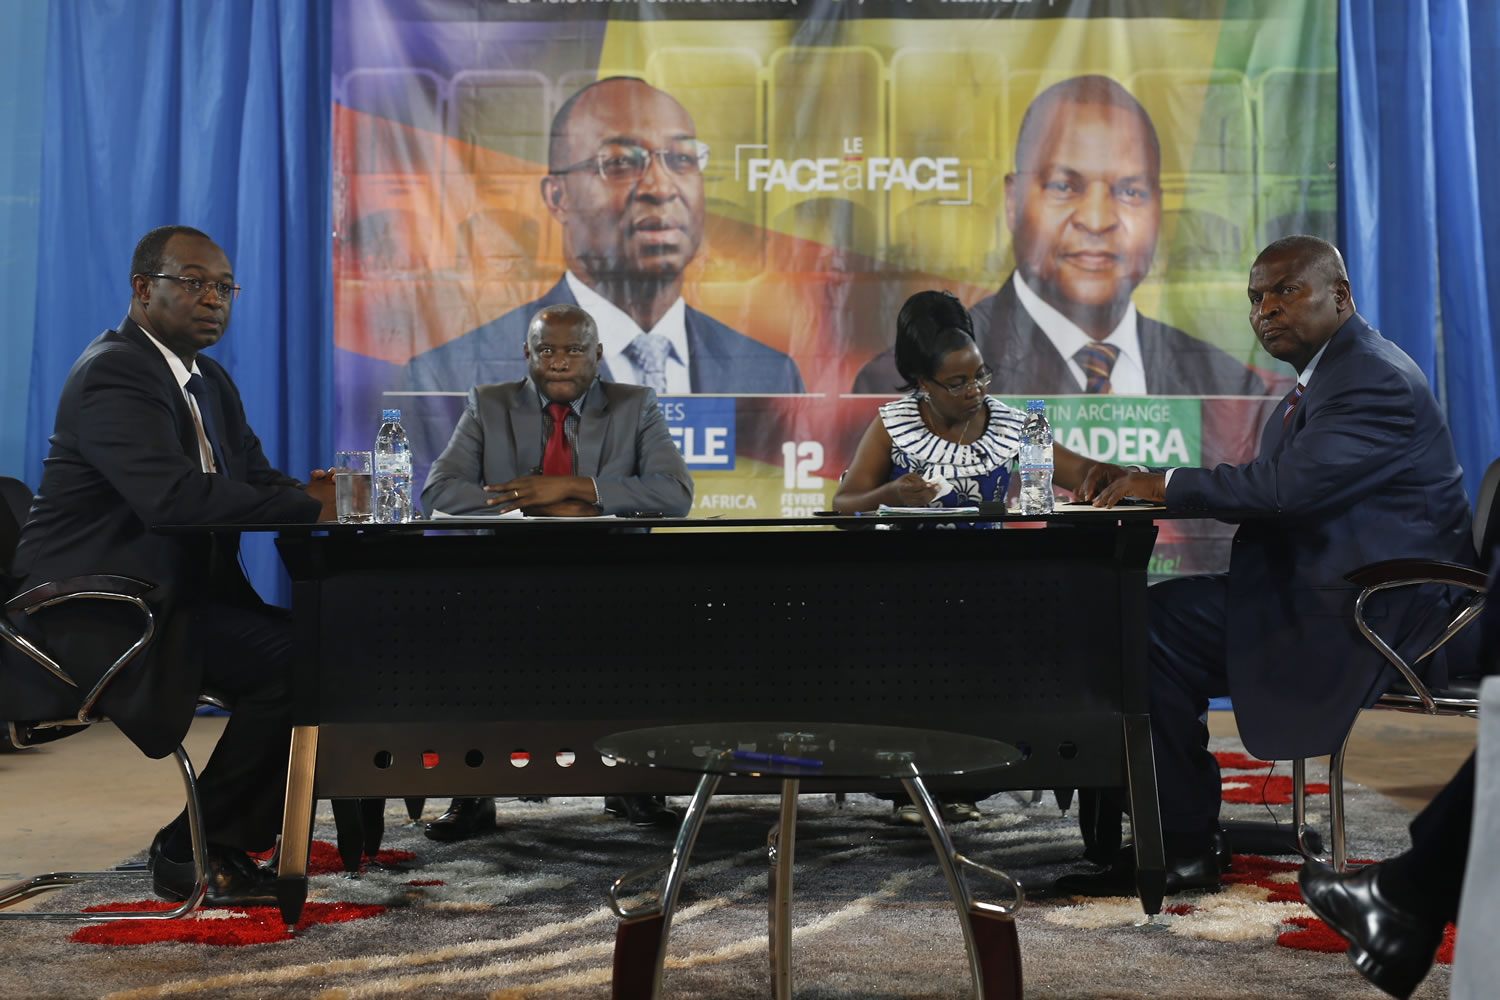 Presidential candidates Faustin Archange Touadera, right, and  Anicet Georges Dologuele, left, participate in a televised  debate in Bangui, Central African Republic,  Friday Feb. 12, 2016.Two former prime ministers,  Touadera and  Dologuele, are running neck-and-neck in the second round of presidential elections Sunday Feb. 14  to end years of violence pitting Muslims against Christians in the Central African Republic.